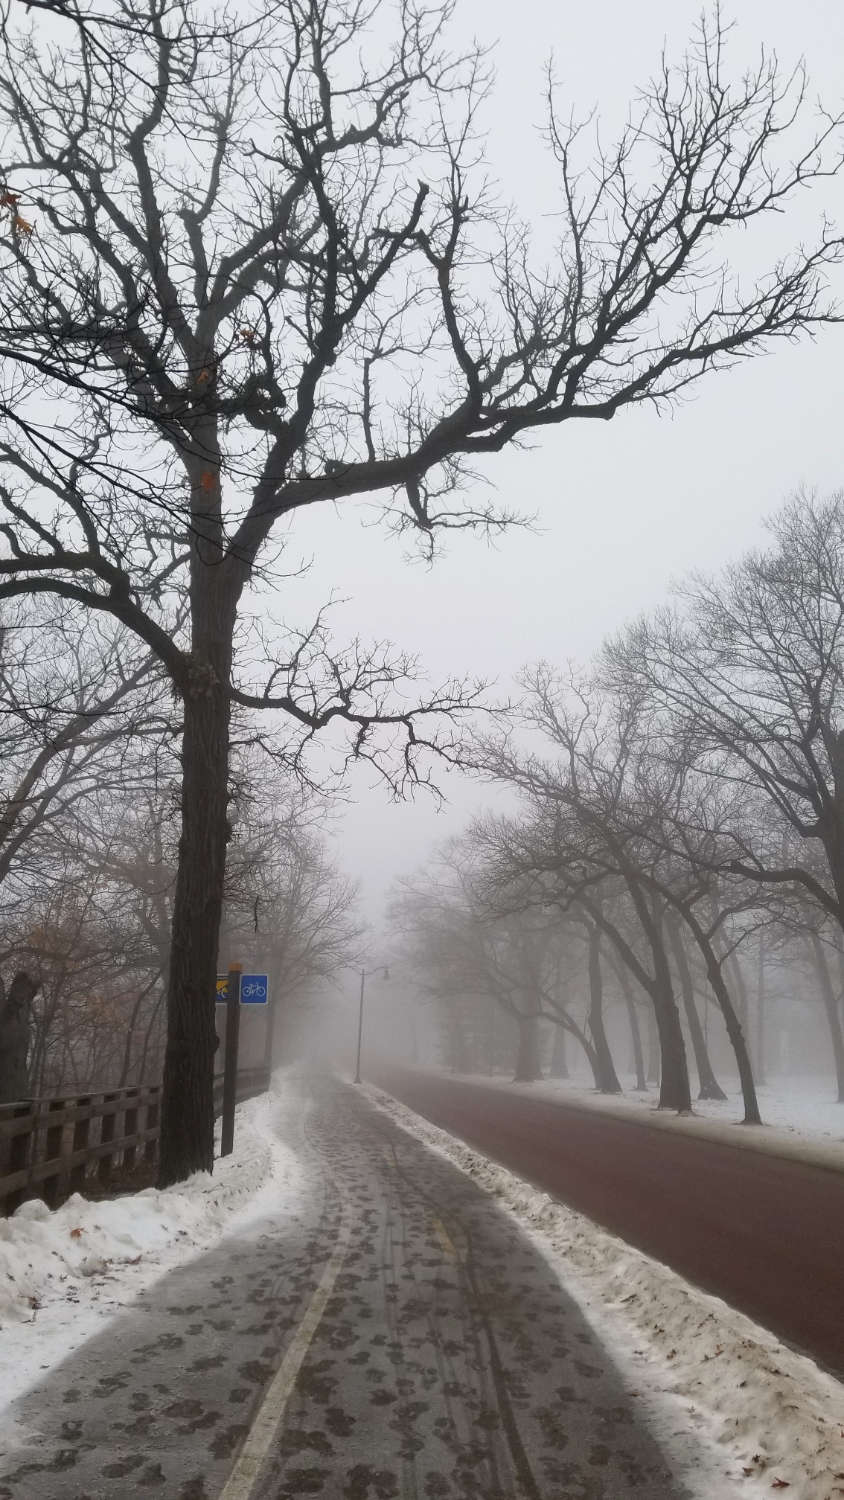 Slushy bike path next to road lined with bare trees on a gray foggy day